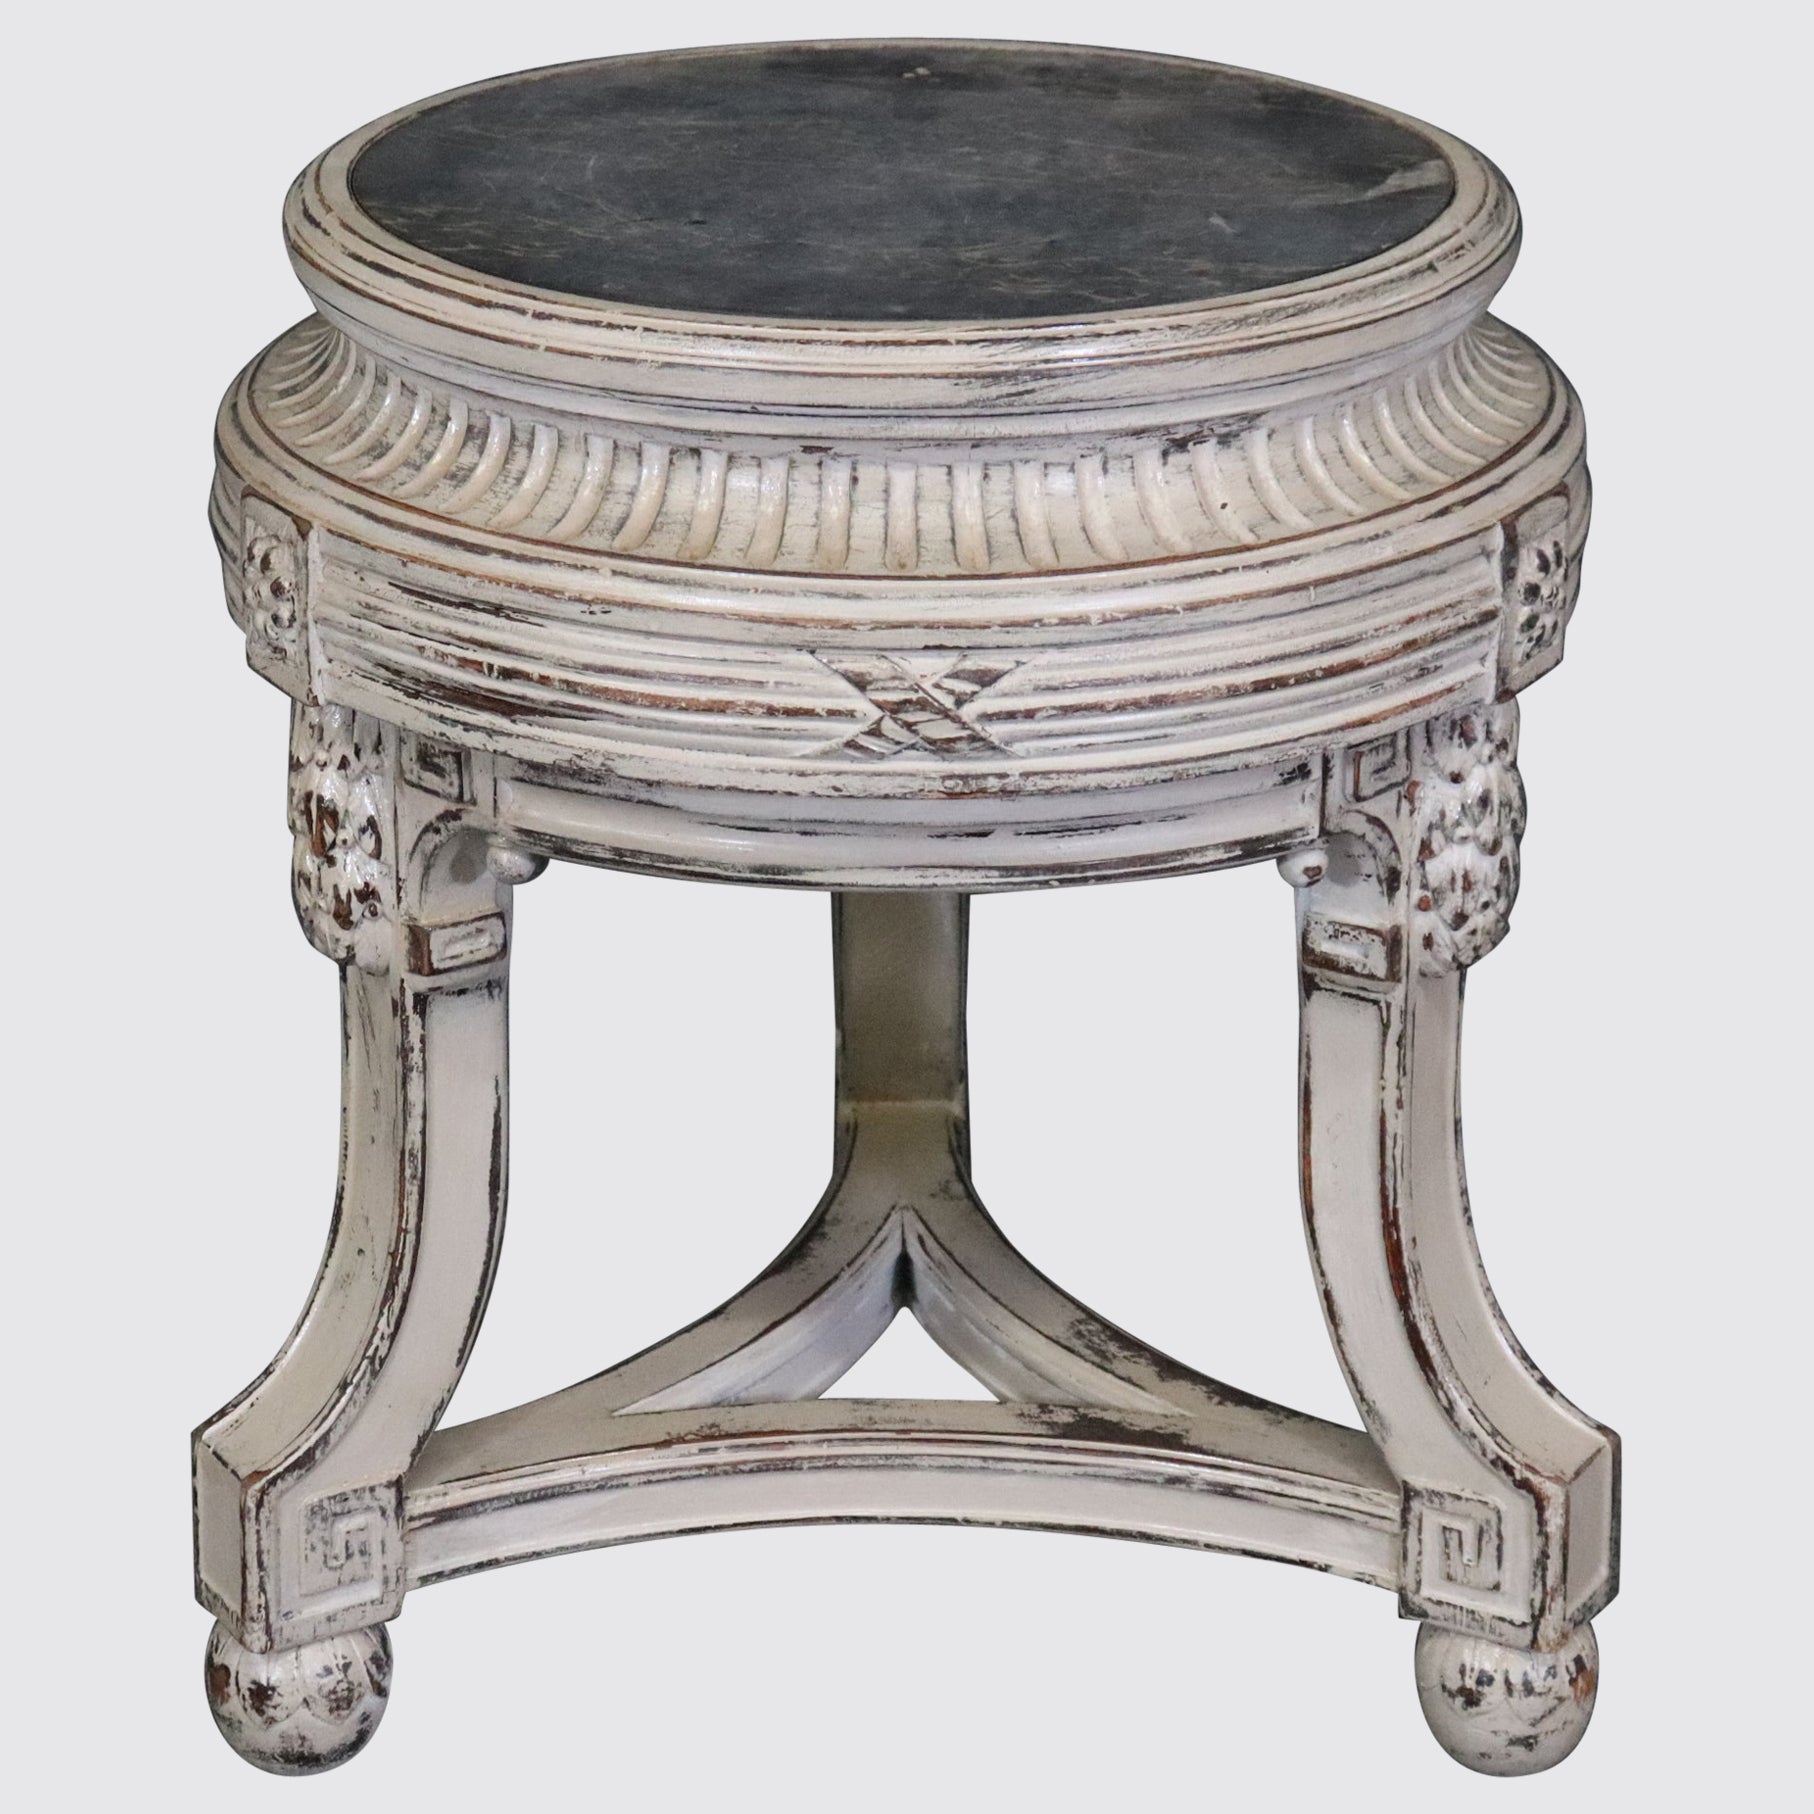 French Regency Style Distressed Finished Marble Top Round End Table Pedestal For Sale